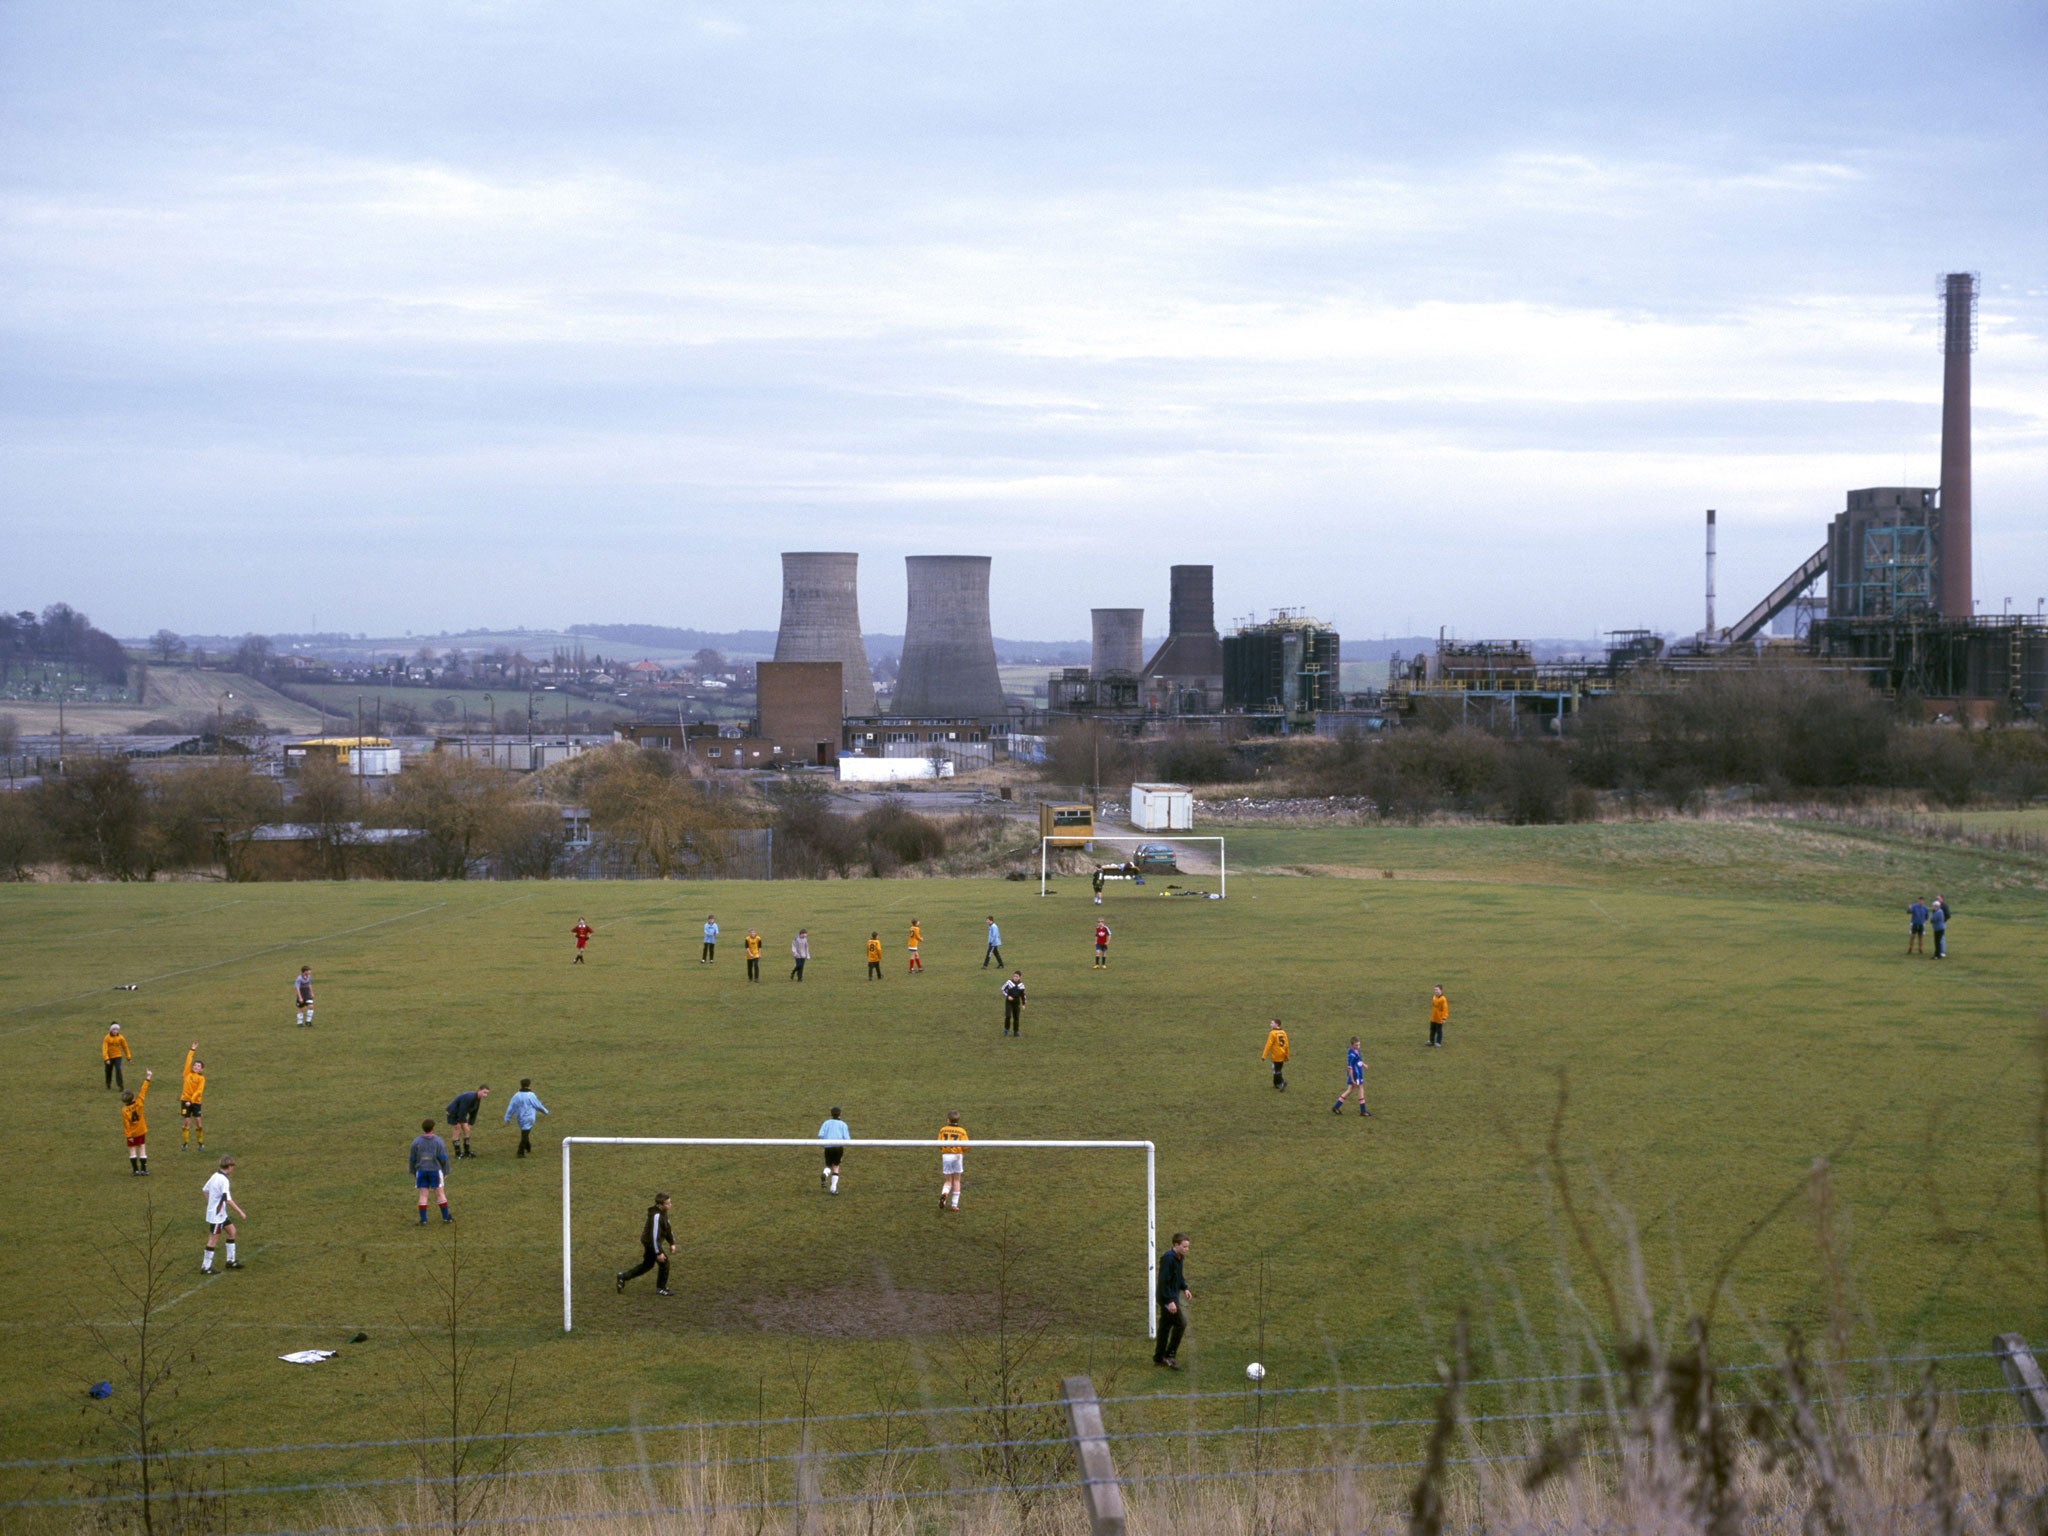 'Two lads somewhere': This scene in North Derbyshire, not far from the FA's £105m St George's Park development, appears in photographer Stuart Roy Clarke's 'Homes of Football: Where The Heart Is' (Bluecoat Press, £19.99), which is published this week